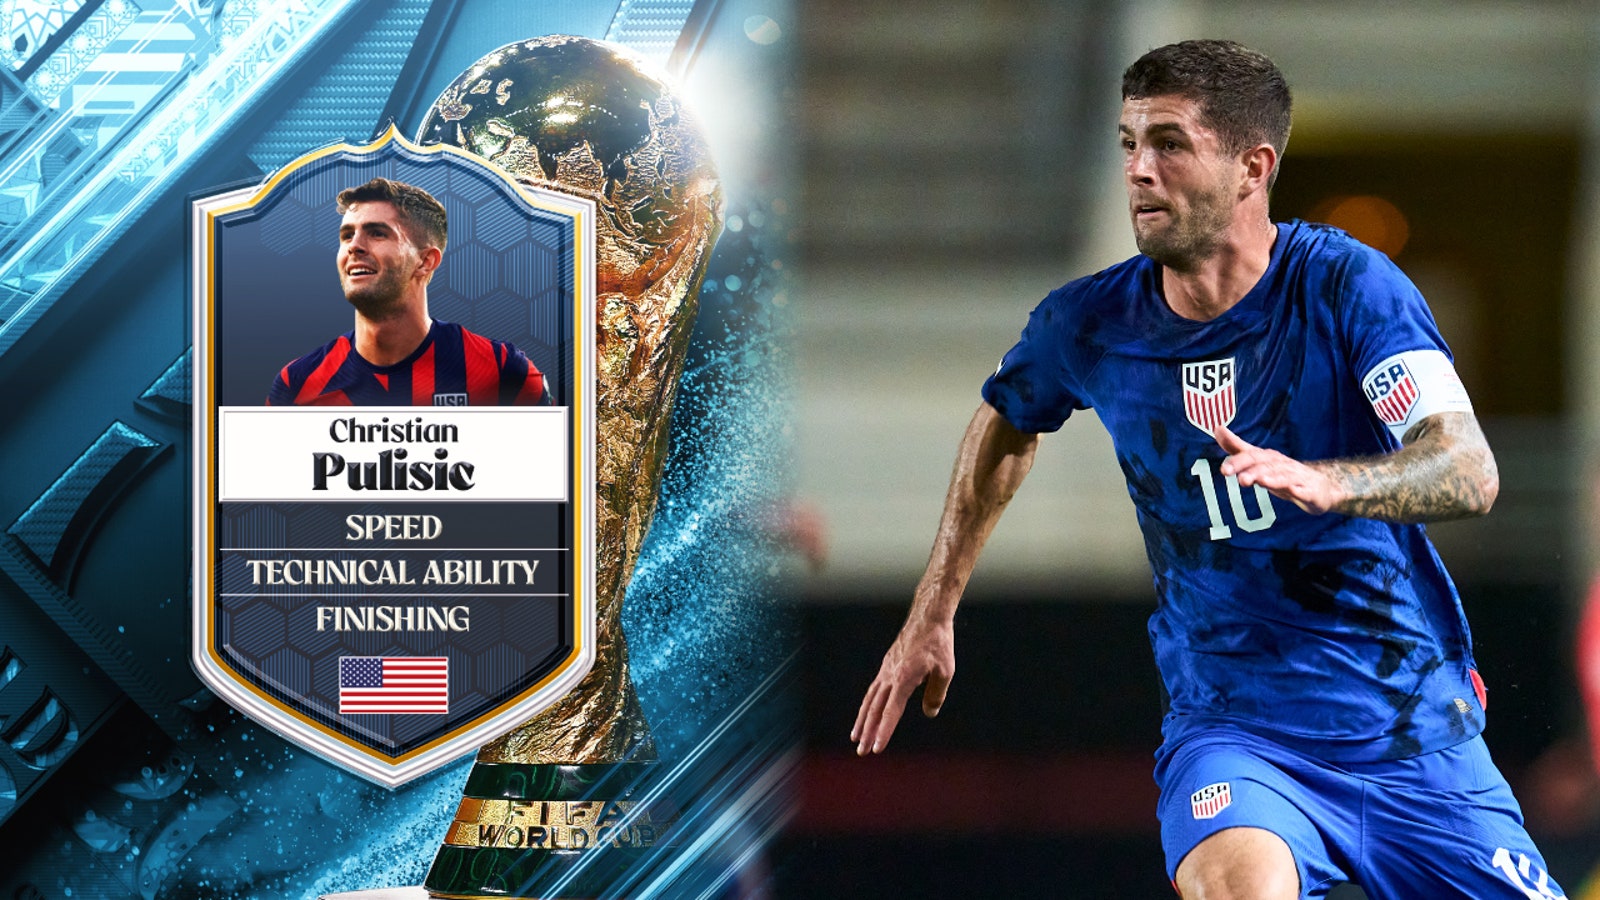 Christian Pulisic is "Captain America"